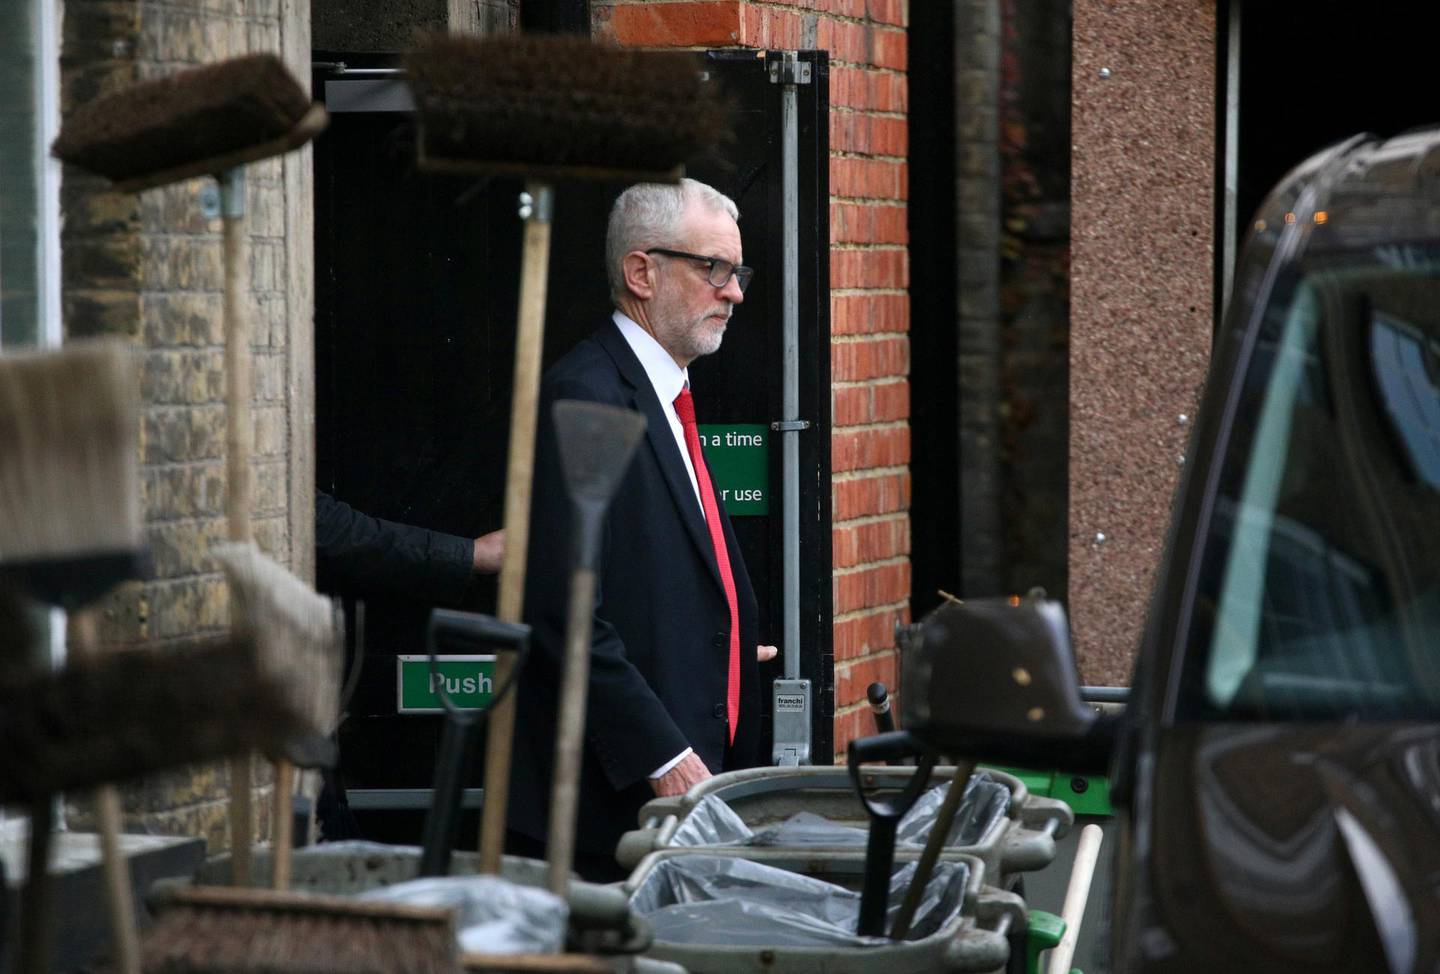 Britain's opposition Labour Party leader Jeremy Corbyn leaves Islington Town Hall through the backdoor after a meeting following the results of the general election in London, Britain, December 13, 2019. REUTERS/Tom Nicholson NO RESALES. NO ARCHIVES.